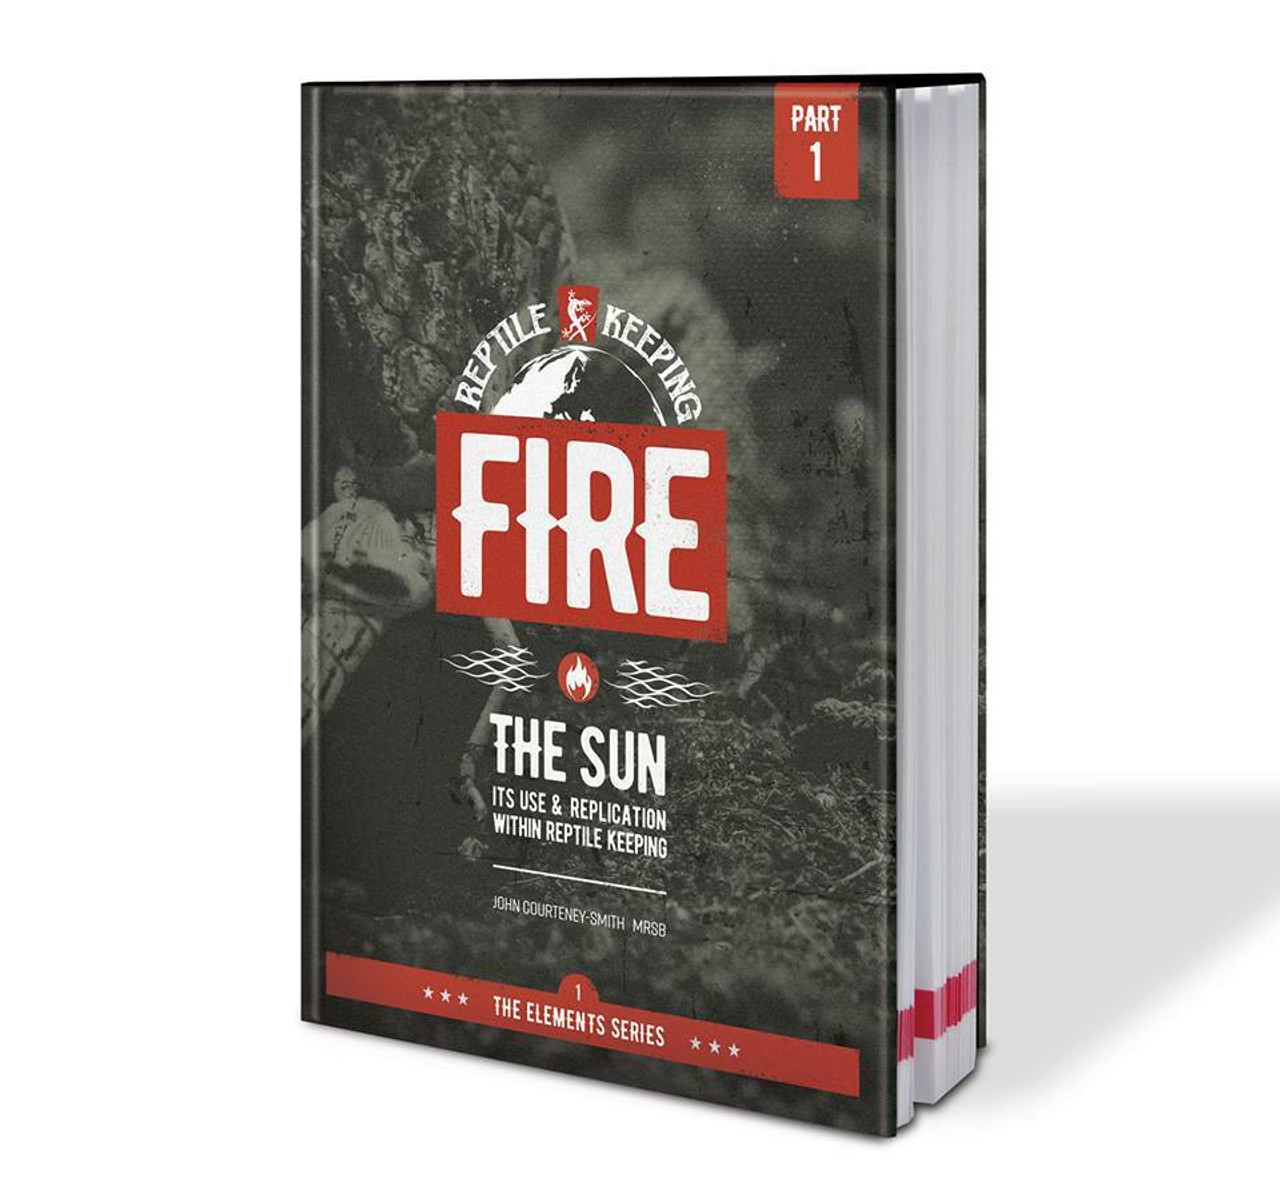 Arcadia The Elements Series, Part 1 Fire, the Sun and Its Replication in Reptile Keeping by John Courteney-Smith of Arcadia Reptile